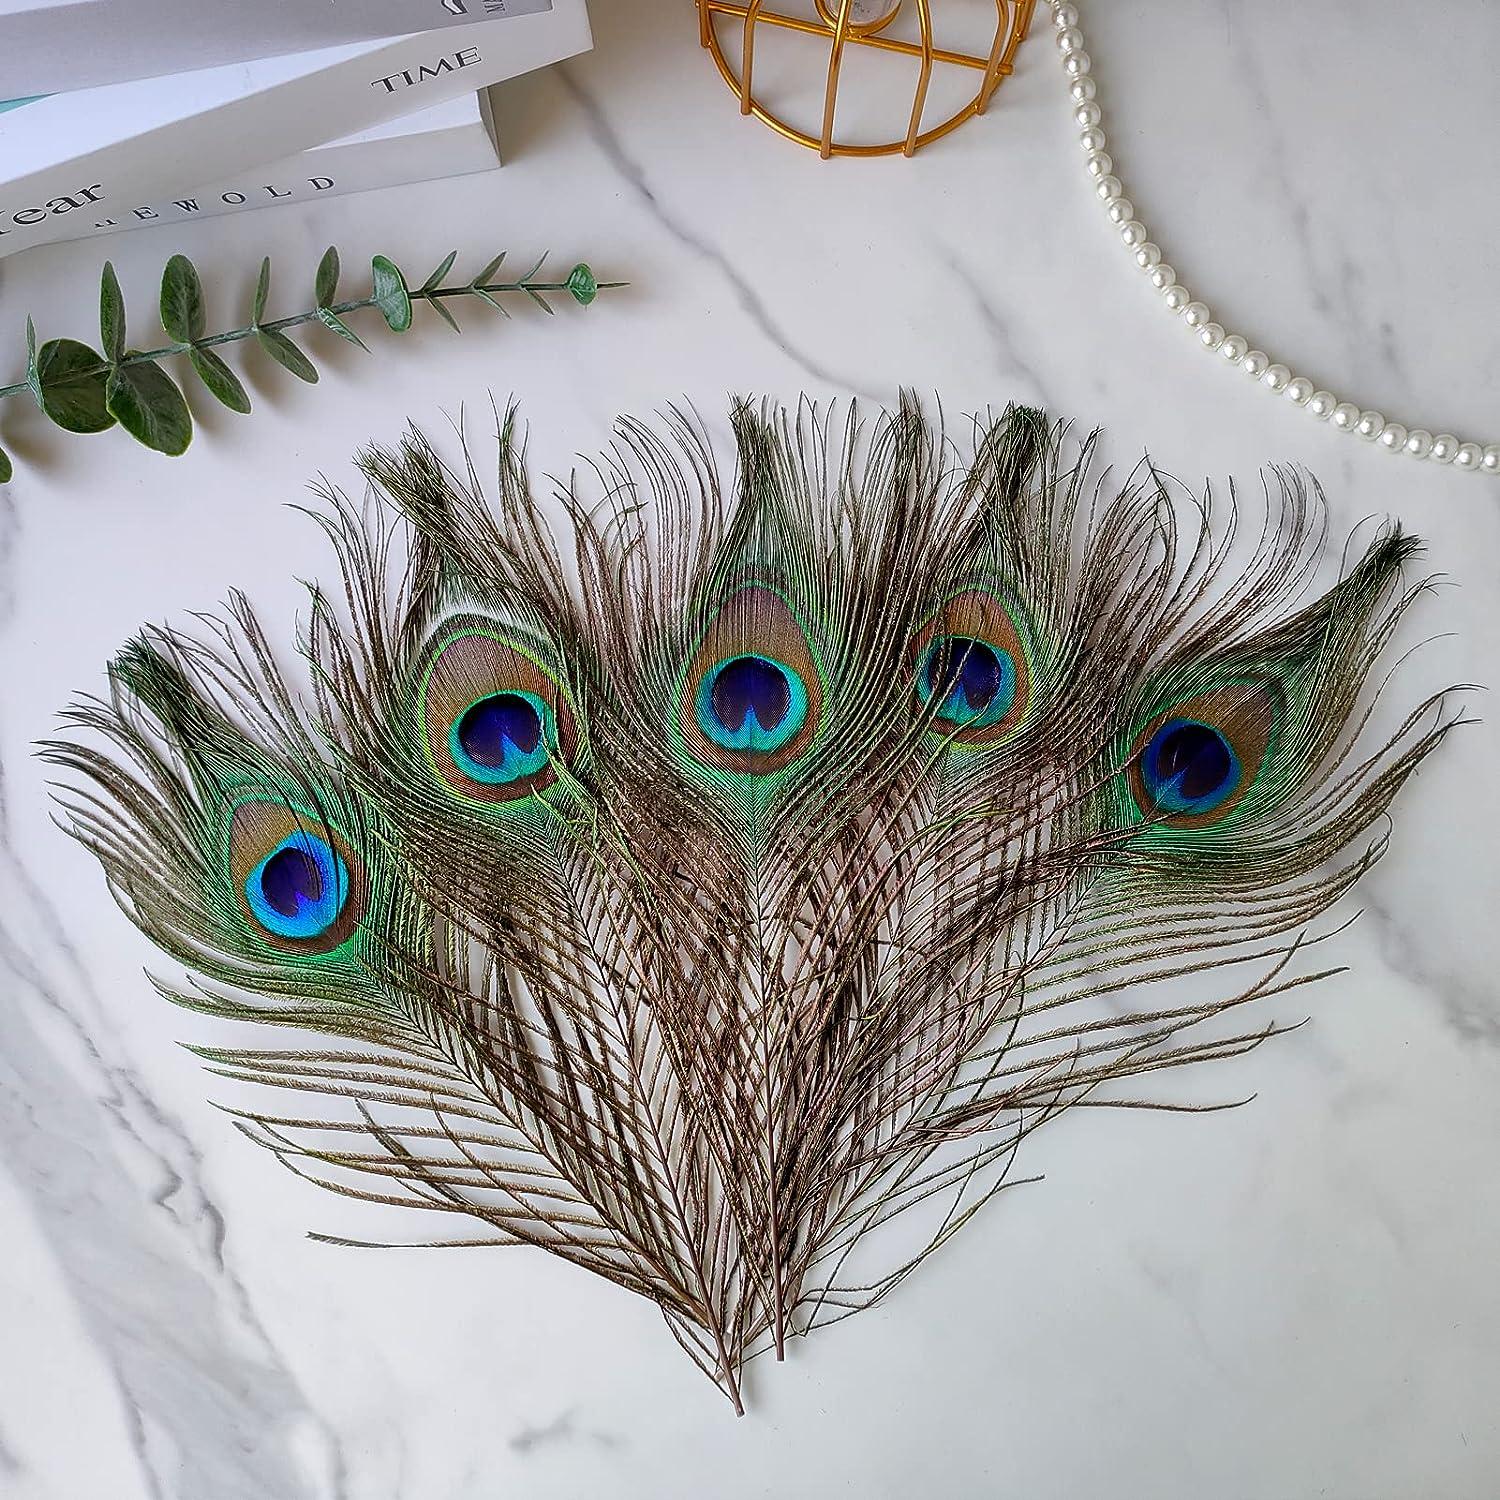 NEWONG 40pcs Peacock Feathers Long 40-45inch Bulk Natural Feathers for Vase  Craft Weddings Home Parties Christmas Decorations - Yahoo Shopping